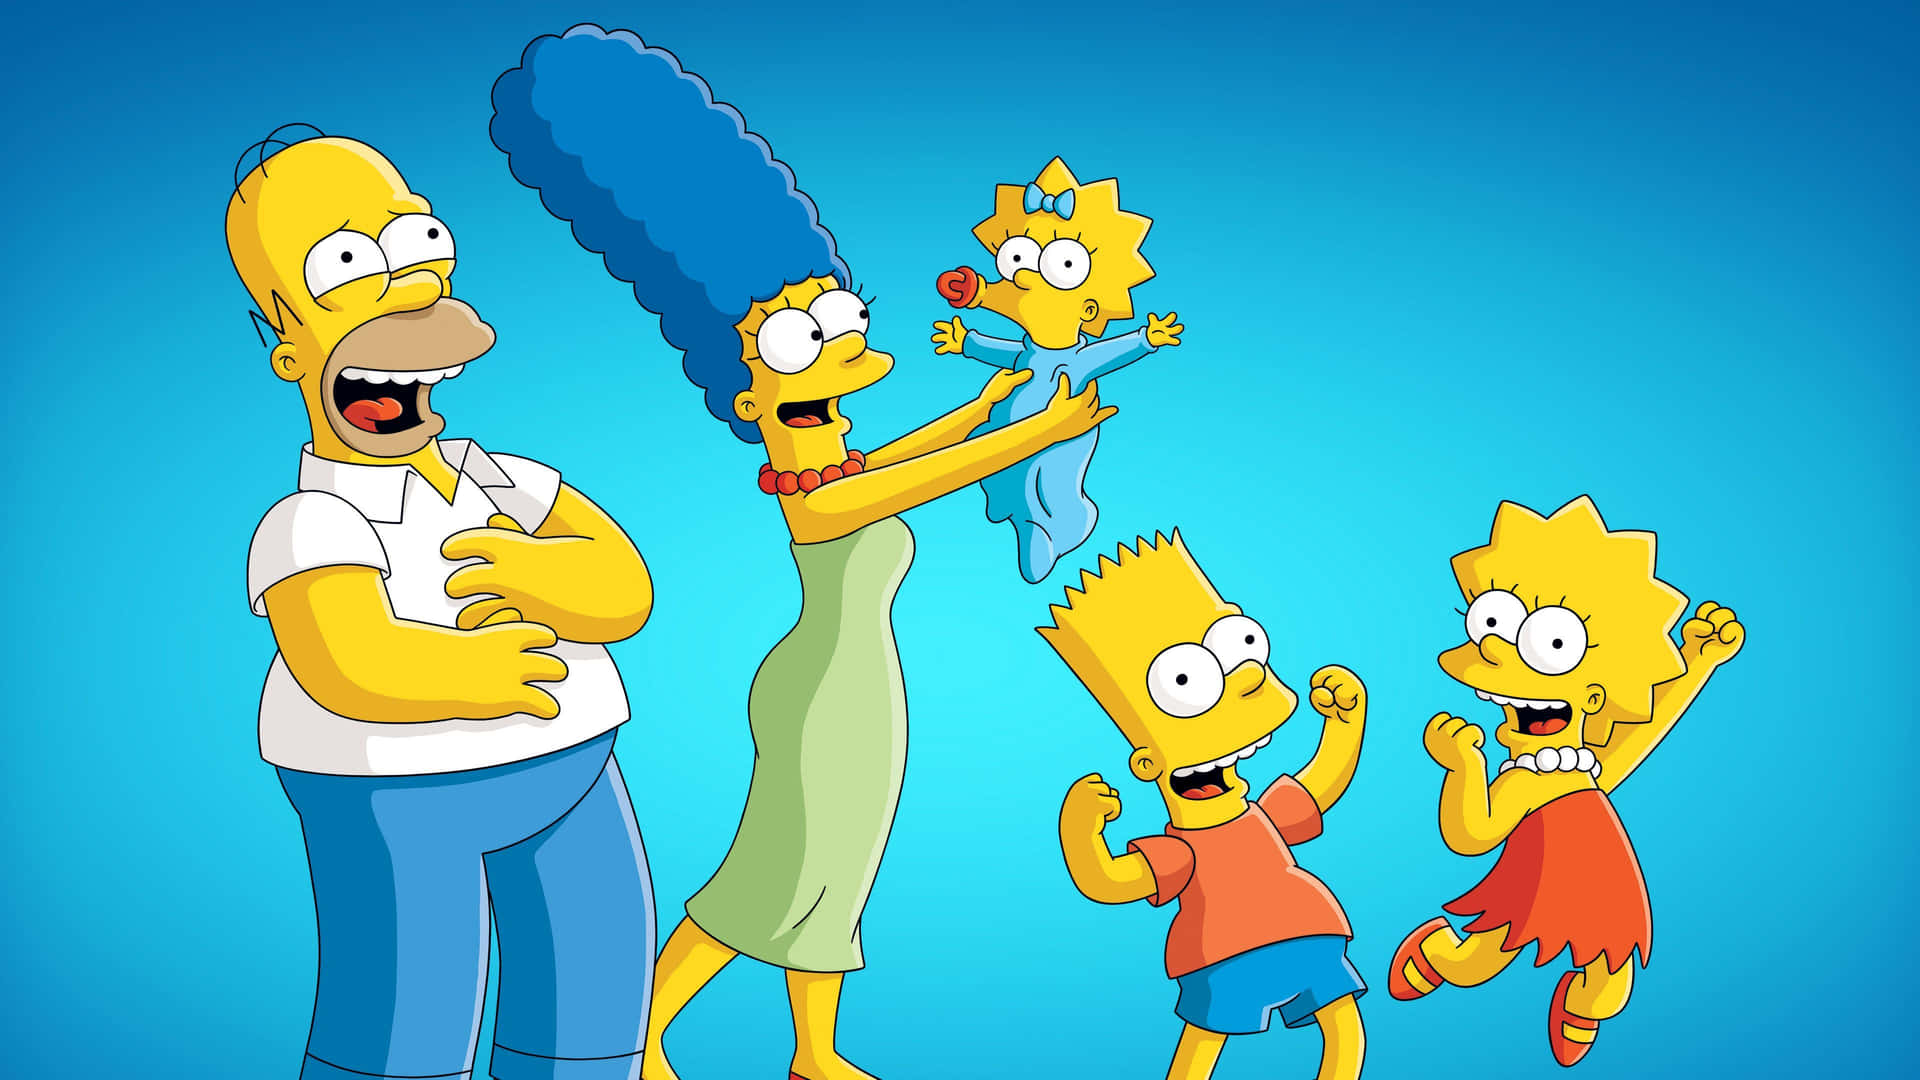 "The Simpsons Family - Join the Fun!"